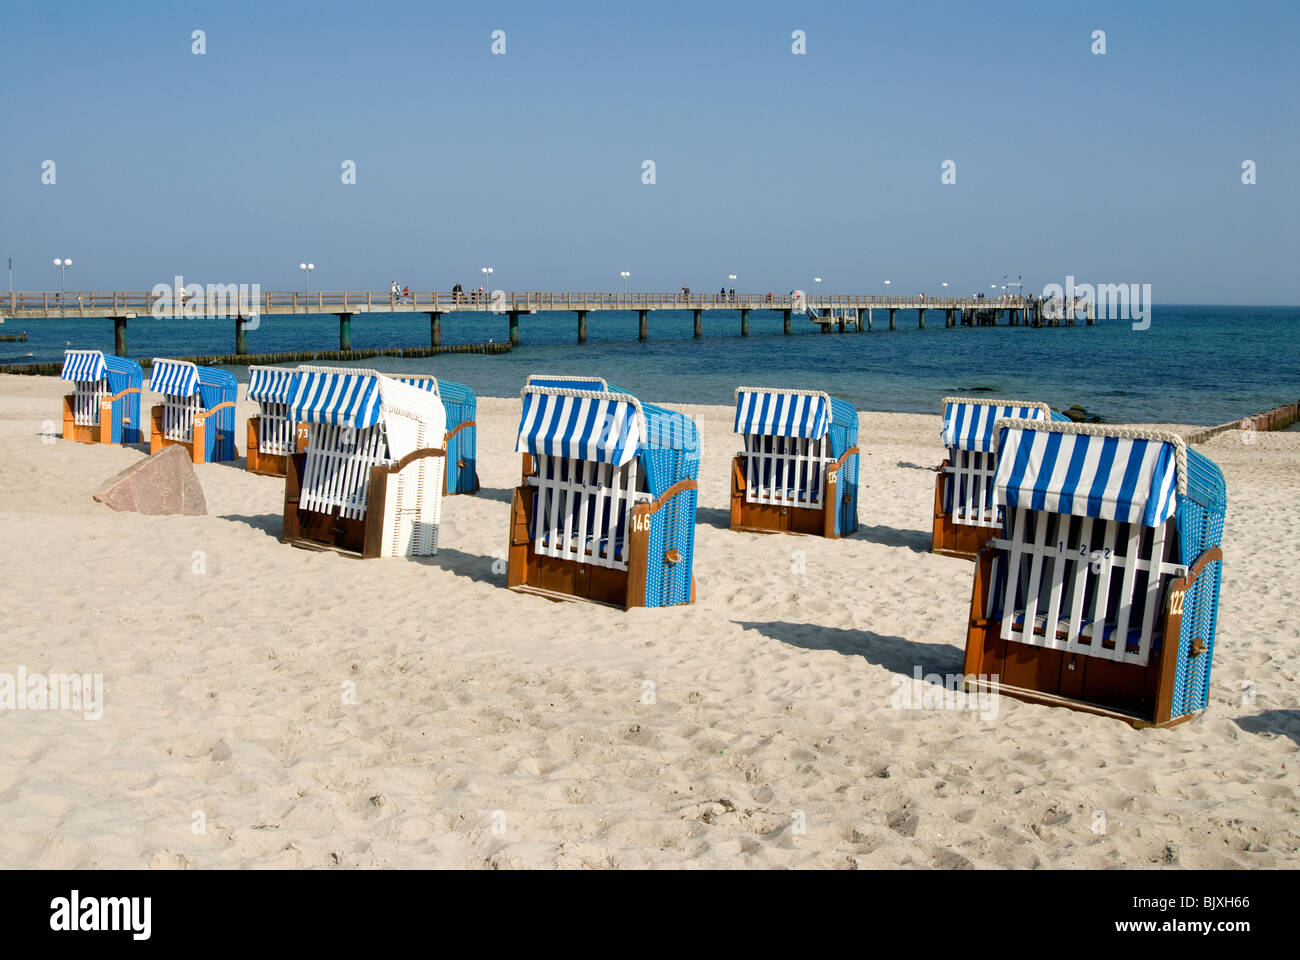 Beach chairs at the beach of Kuehlungsborn, Germany, Baltic Sea, Mecklenburg-Western Pomerania. Stock Photo